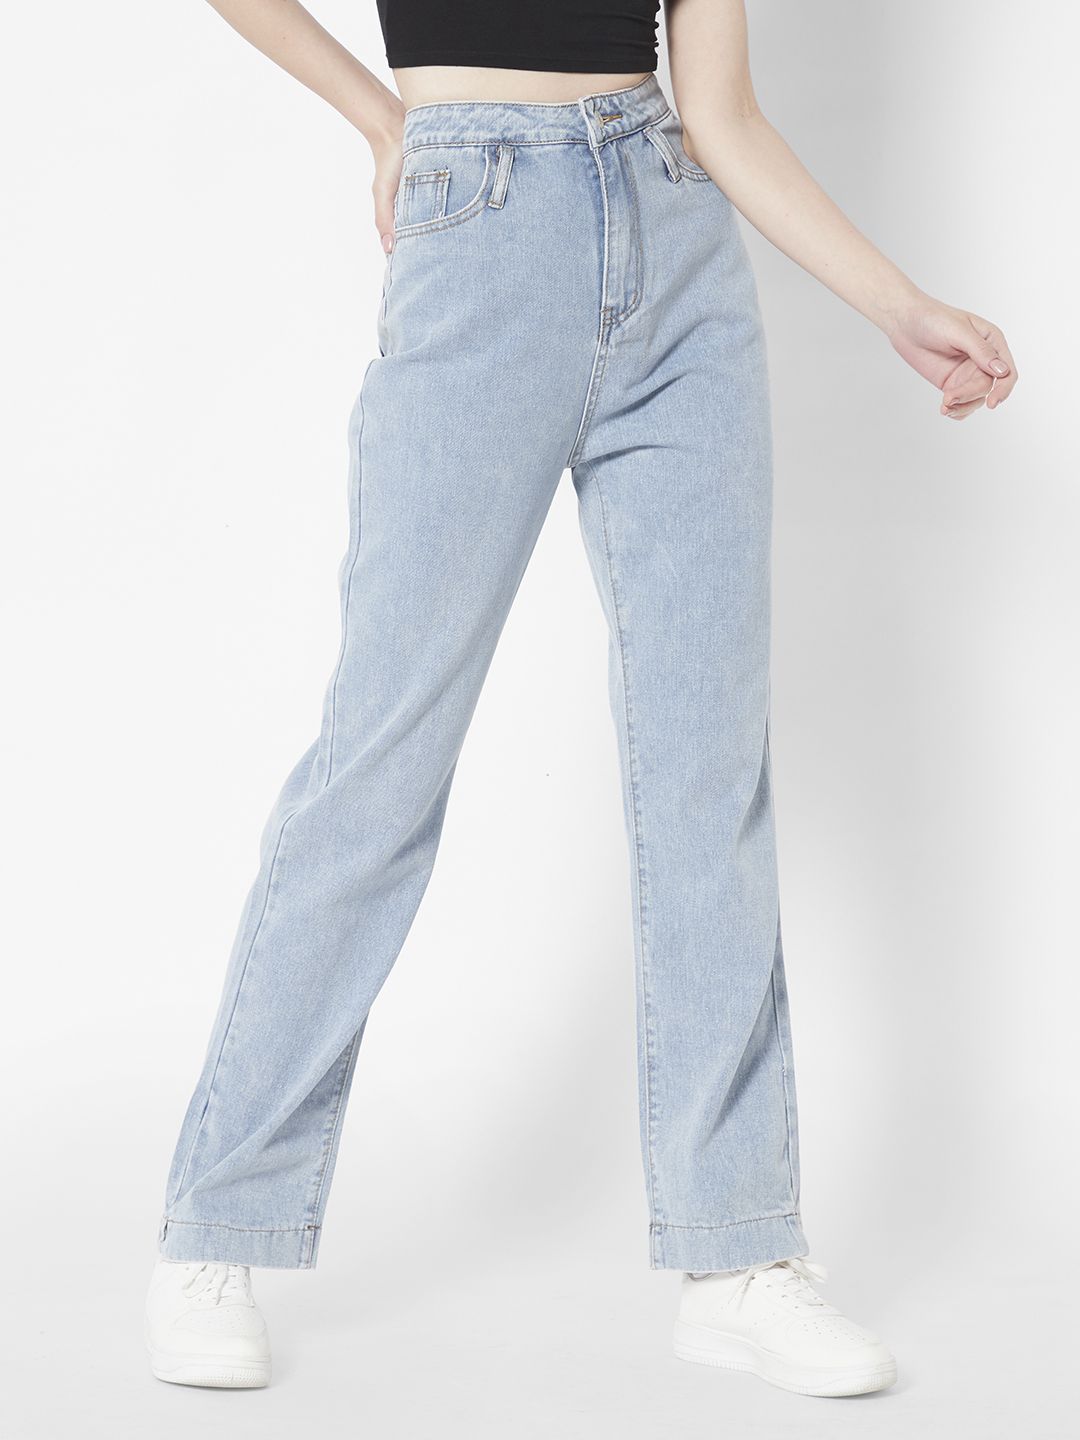 URBANIC Women Blue High-Rise Stretchable Jeans Price in India